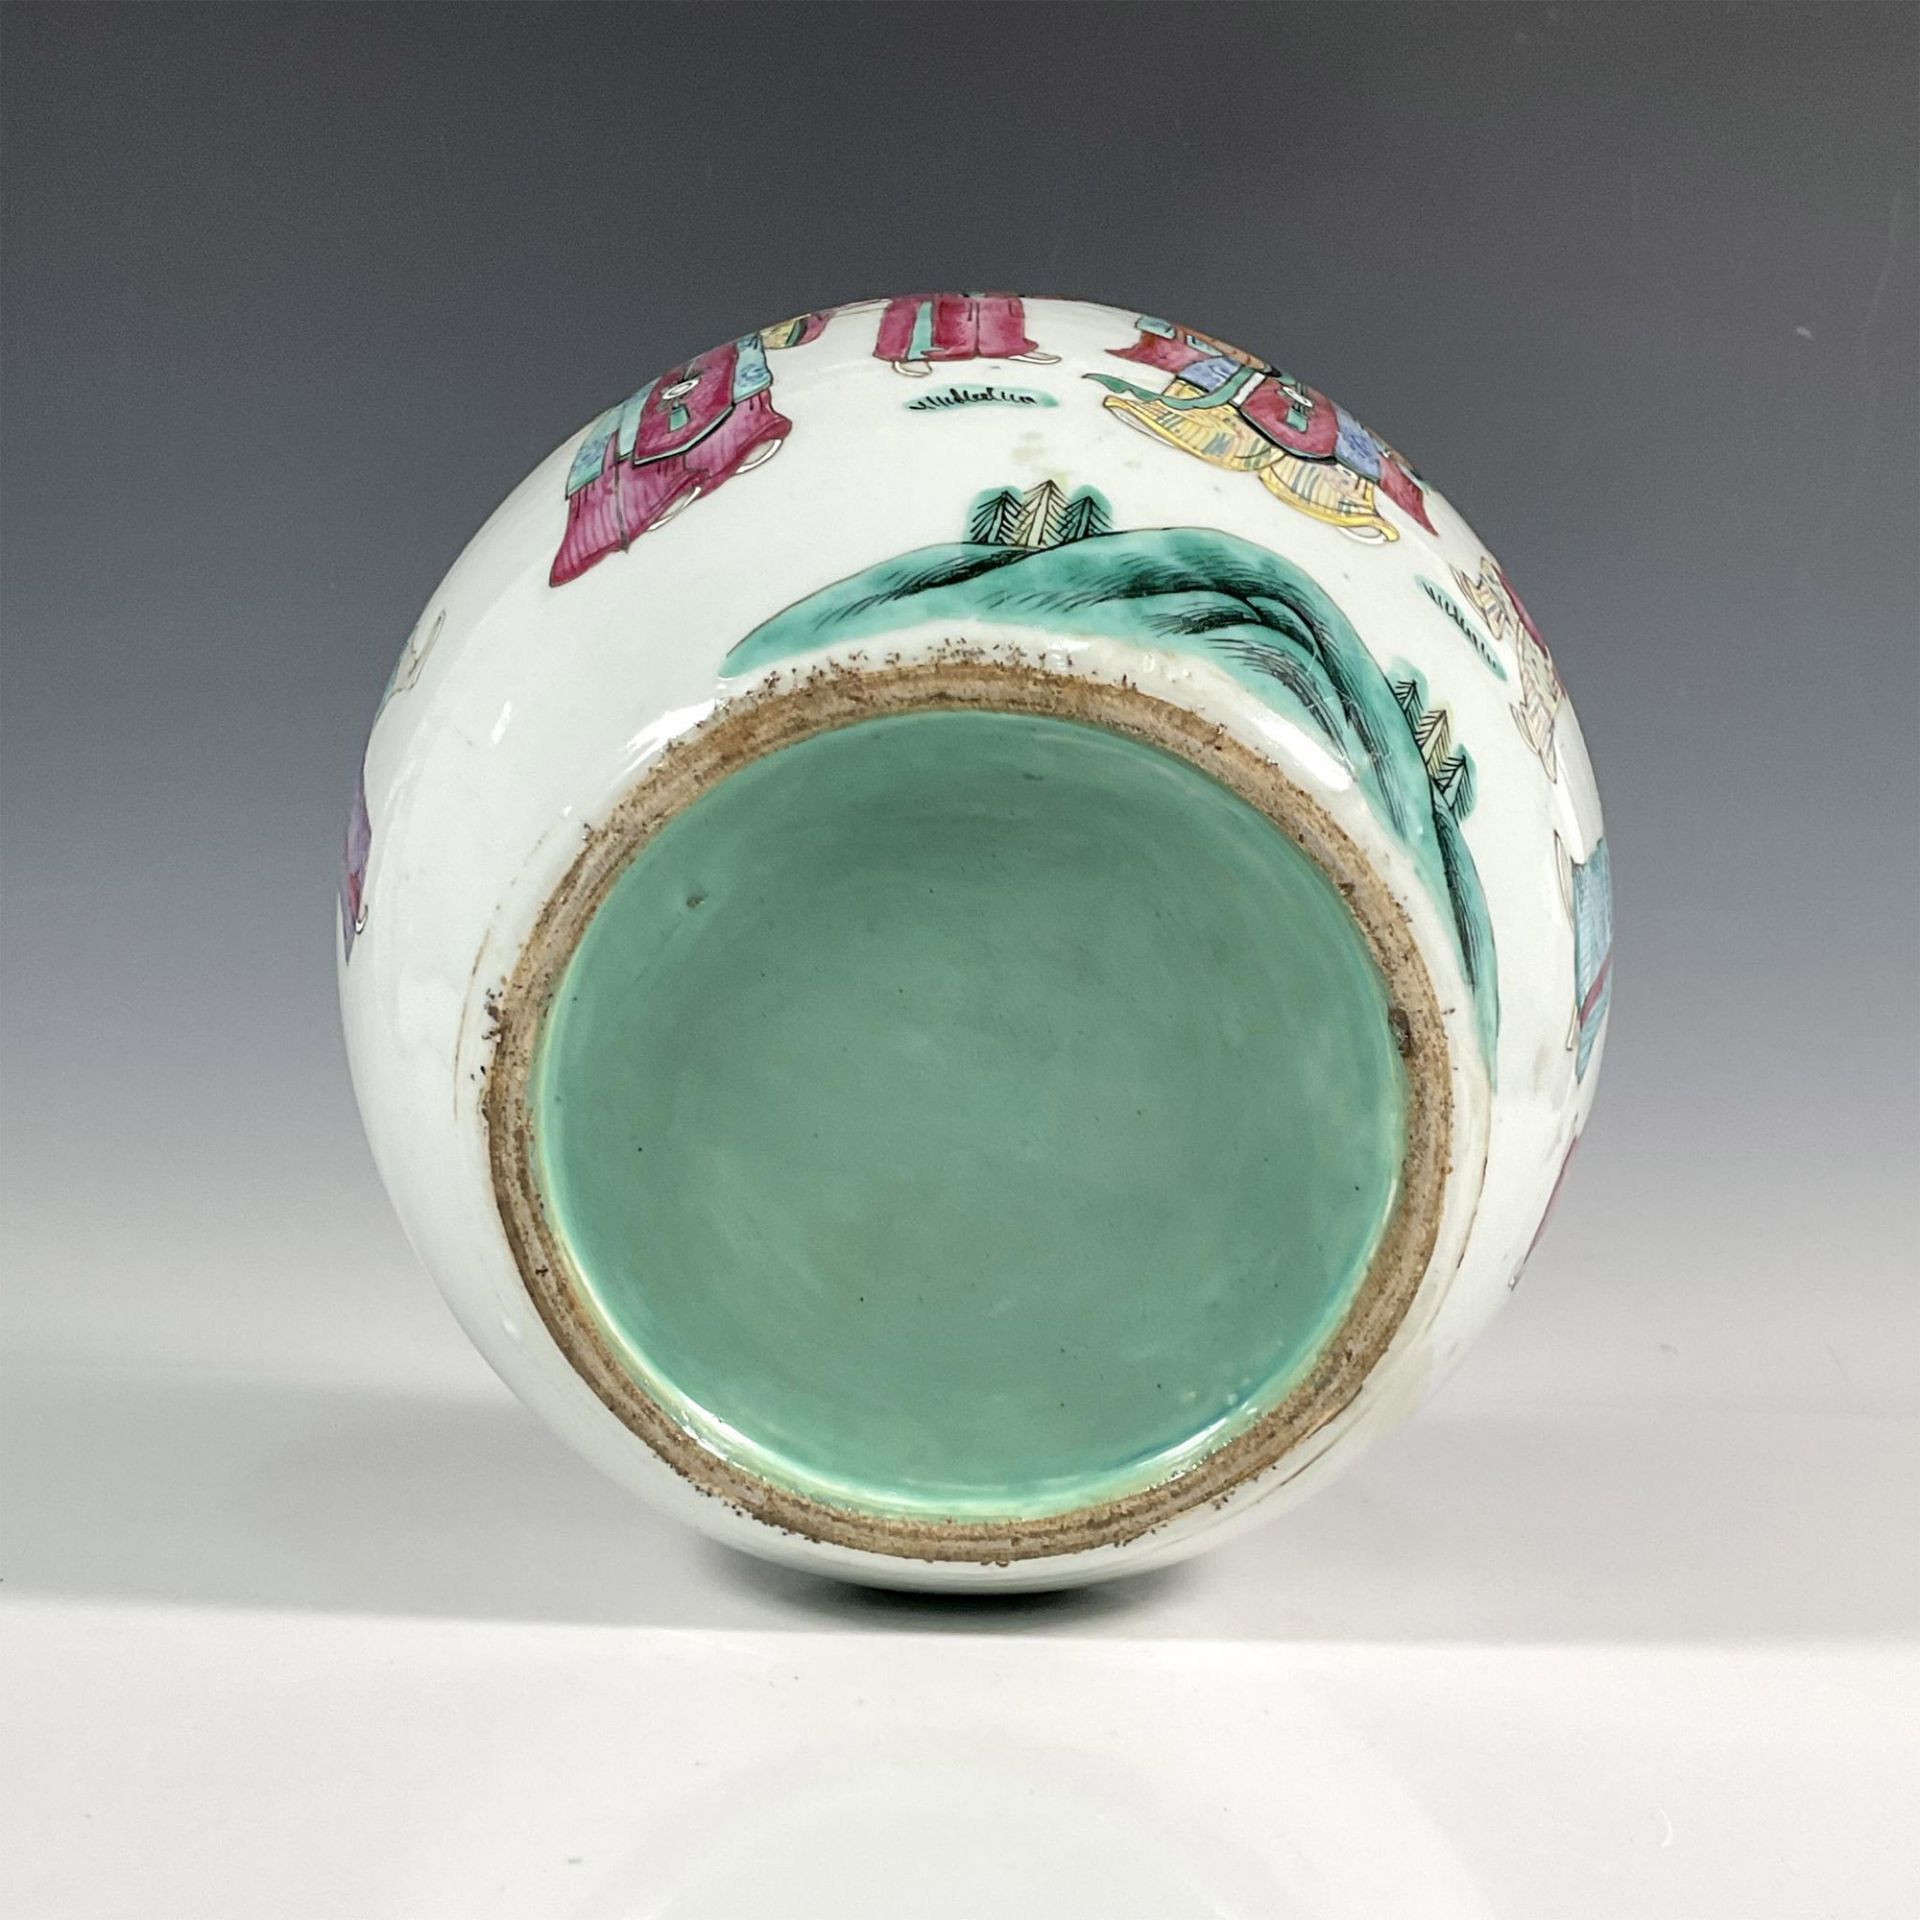 Chinese Qing Dynasty Porcelain Covered Ginger Pot - Image 3 of 5